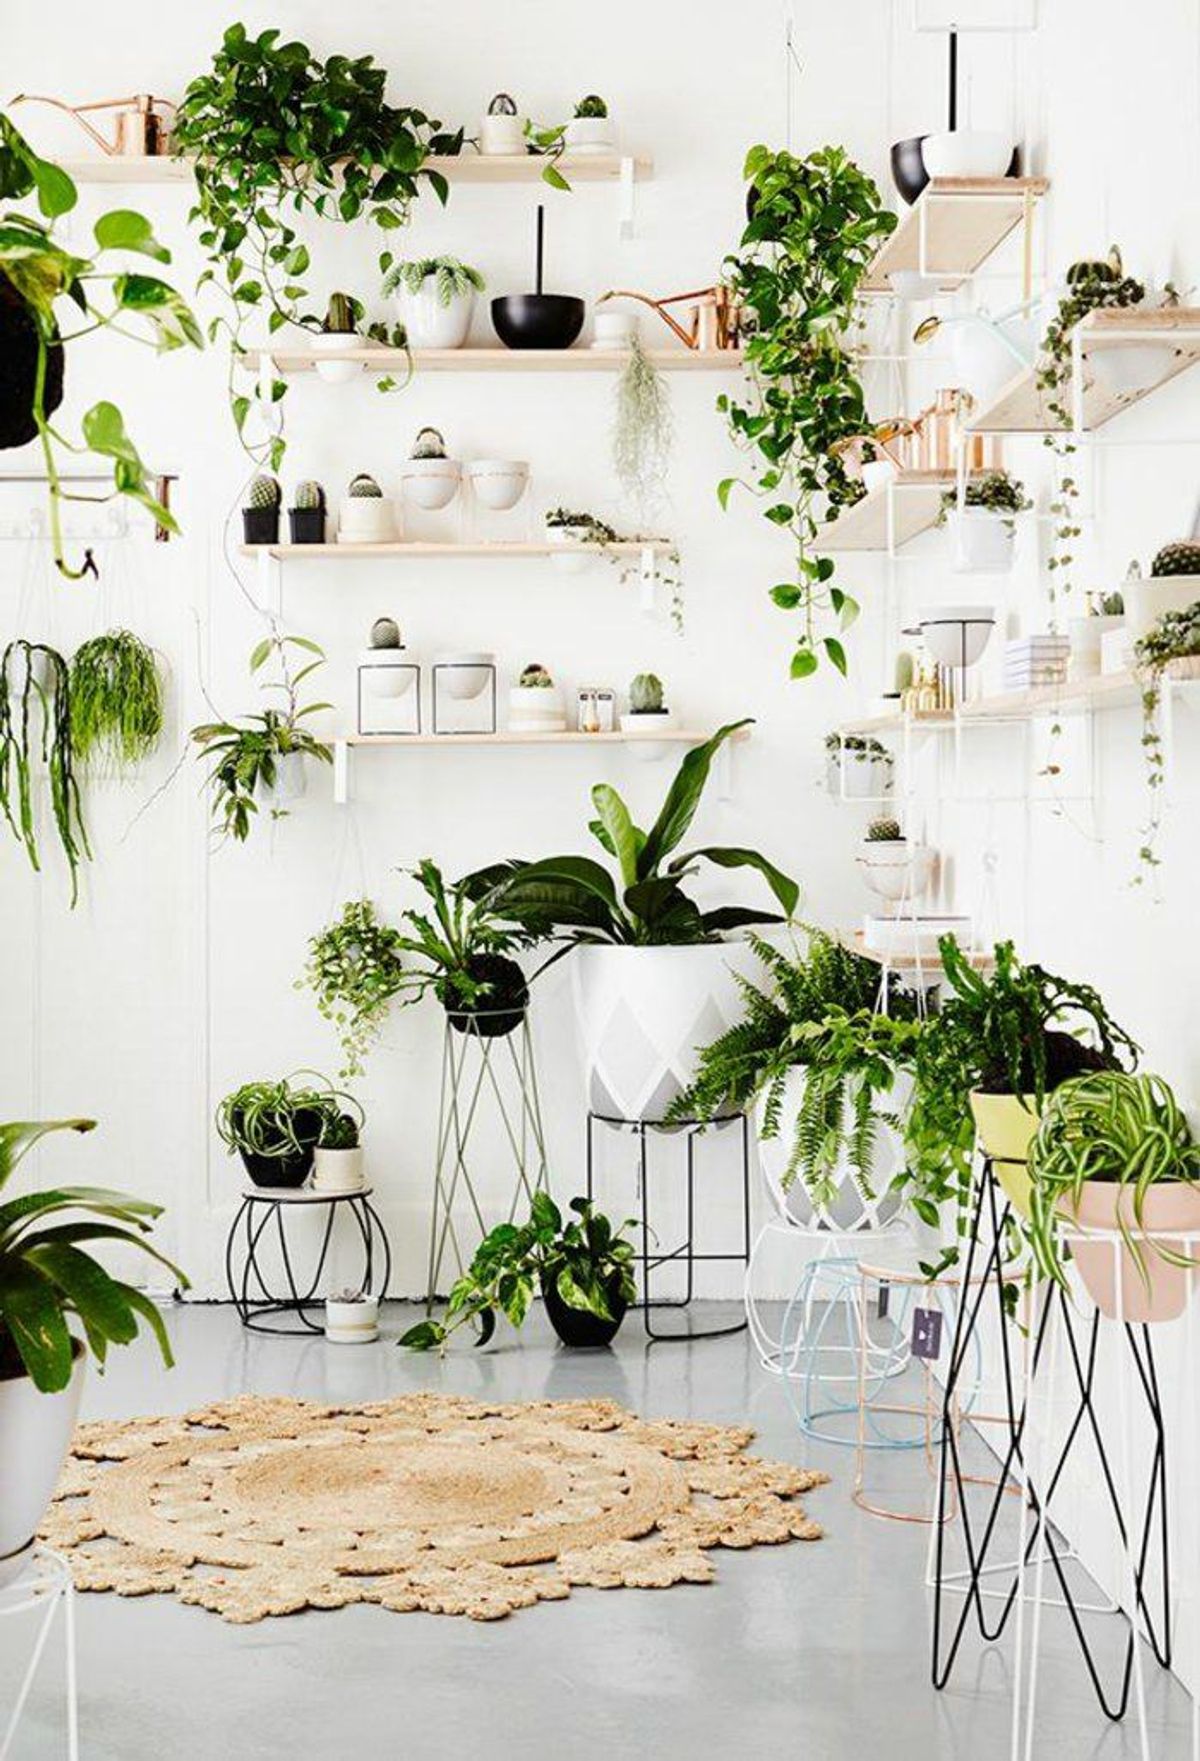 4 Ways Investing In Houseplants Can Help You